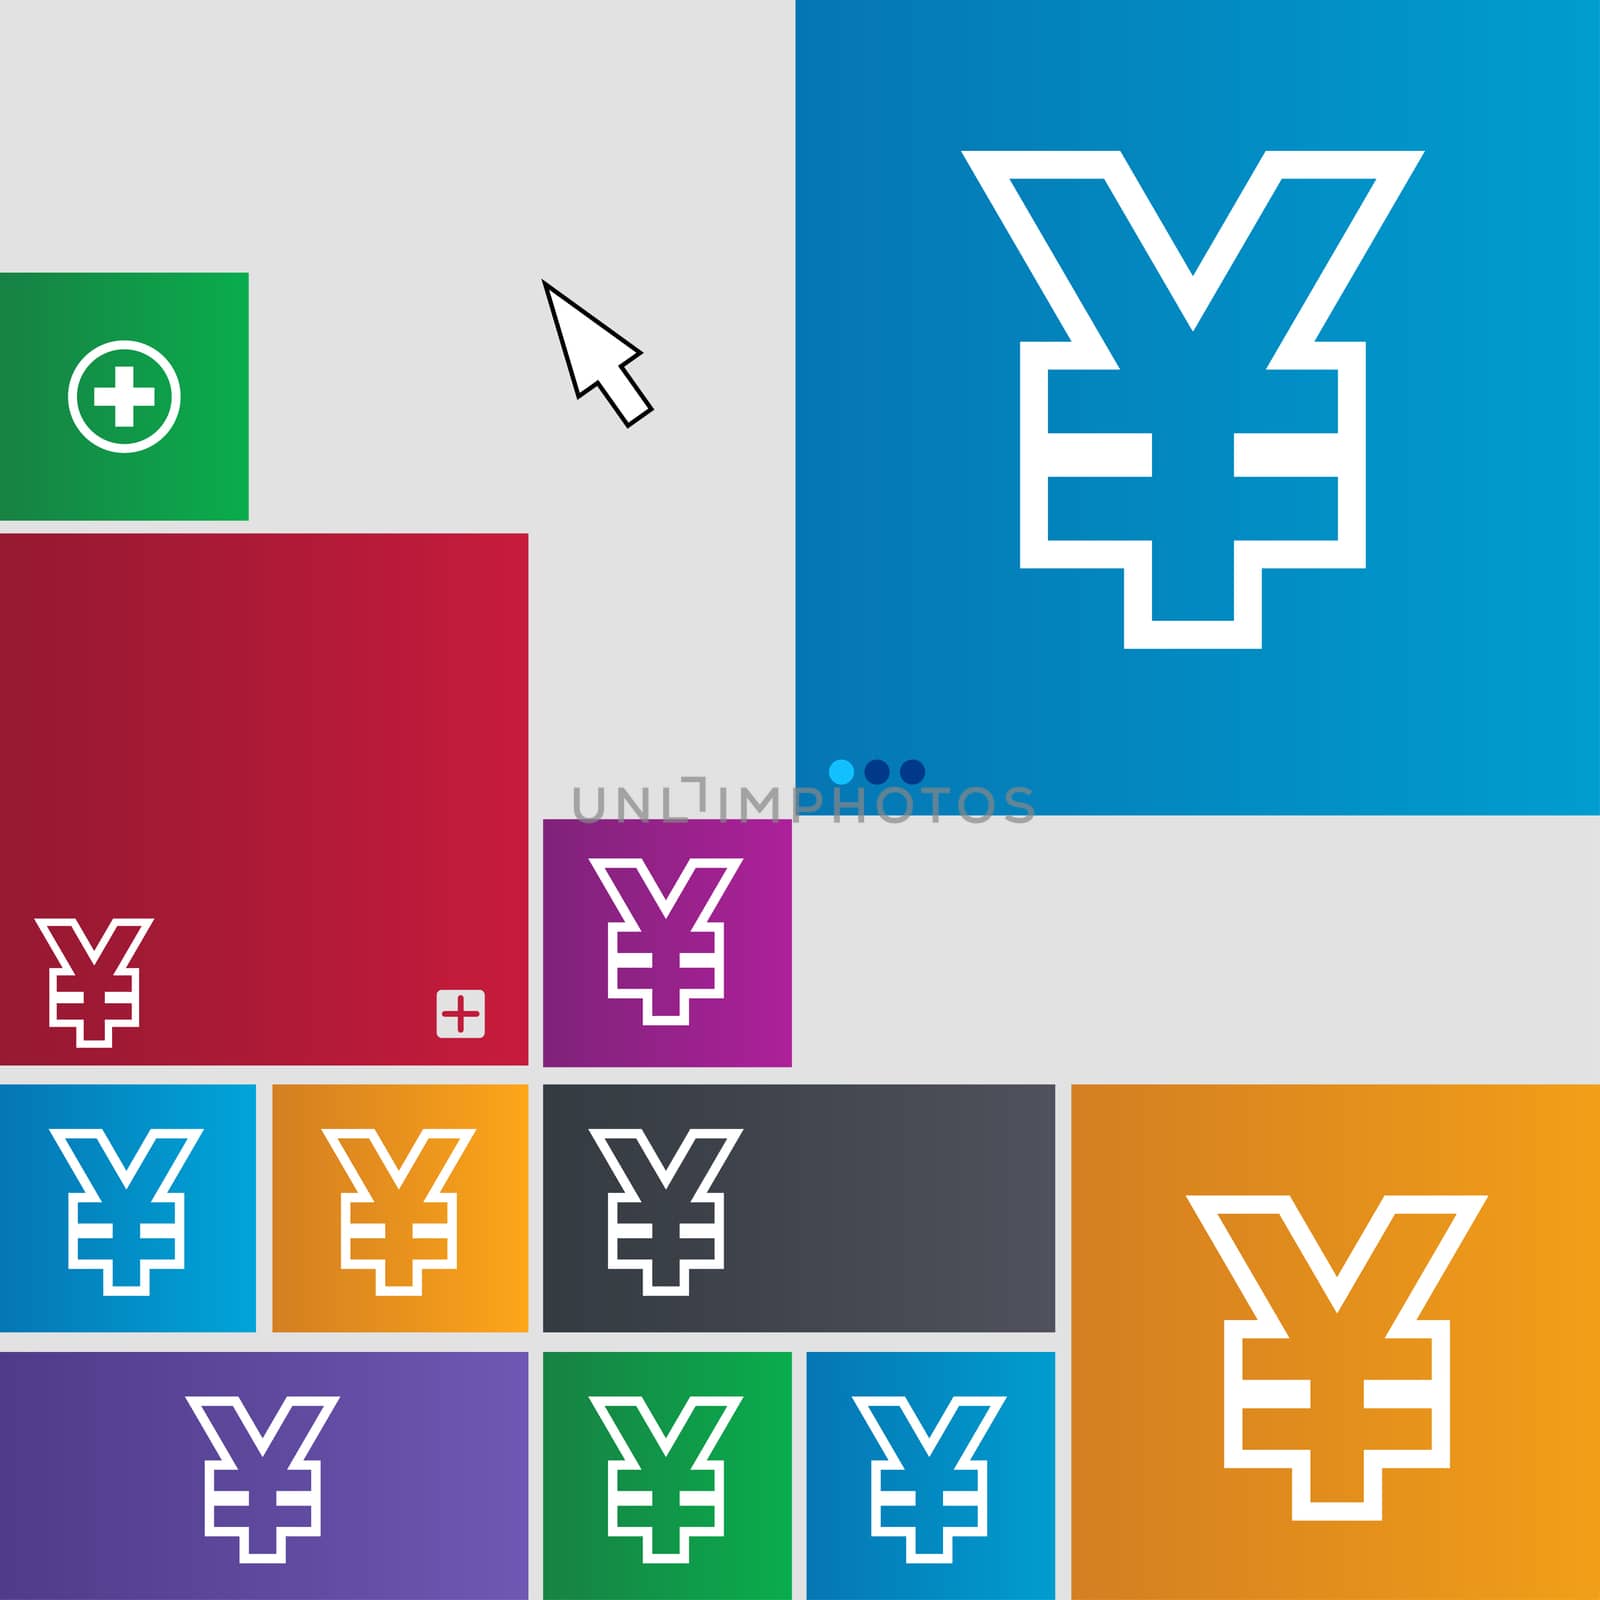 Yen JPY icon sign. buttons. Modern interface website buttons with cursor pointer. illustration